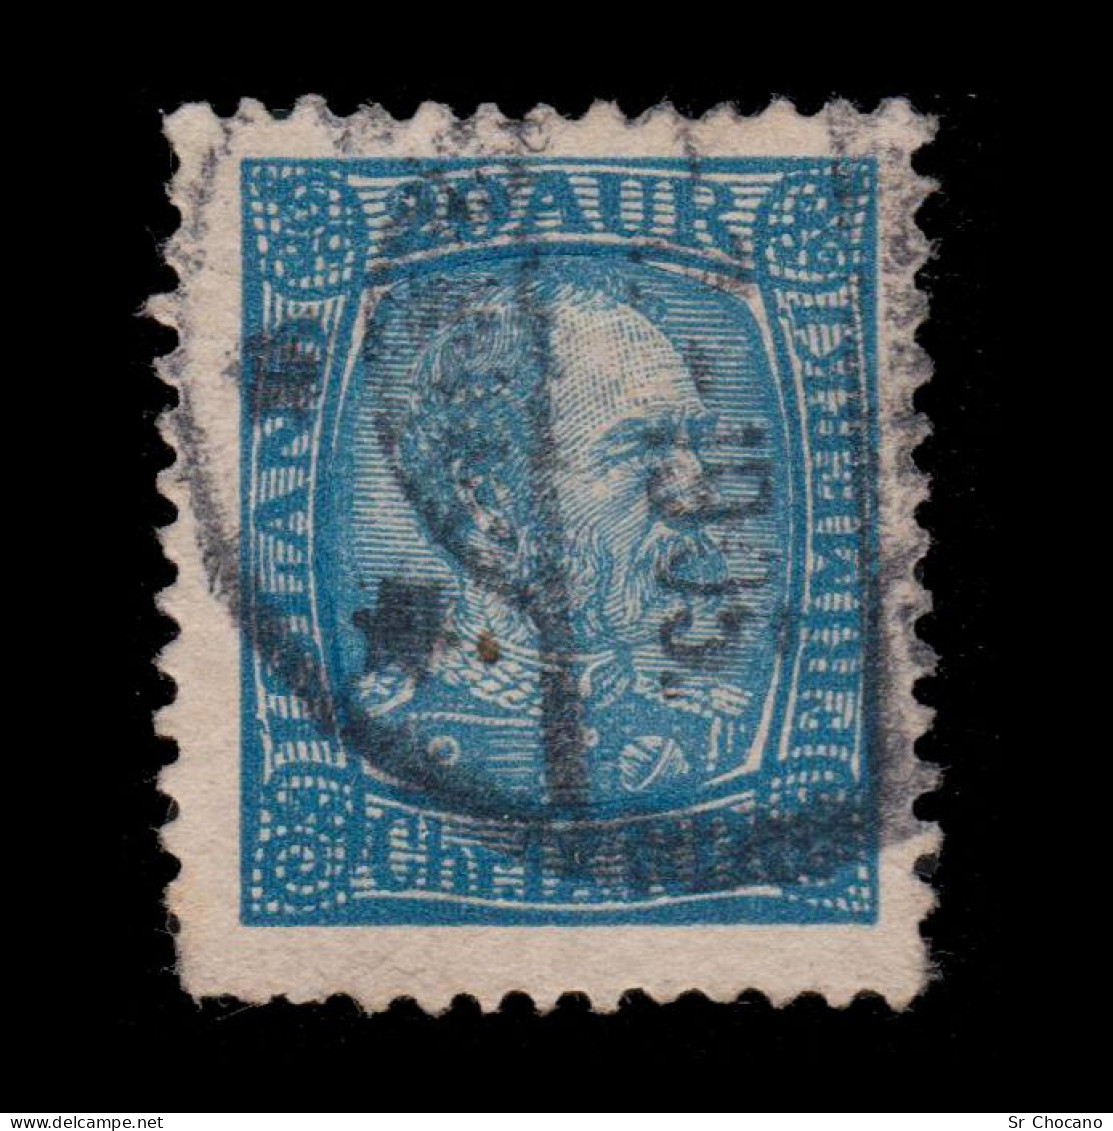 ICELAND STAMP.1902-04.King Christian IX.20a Deep Blue .Scott 40.USED - Used Stamps